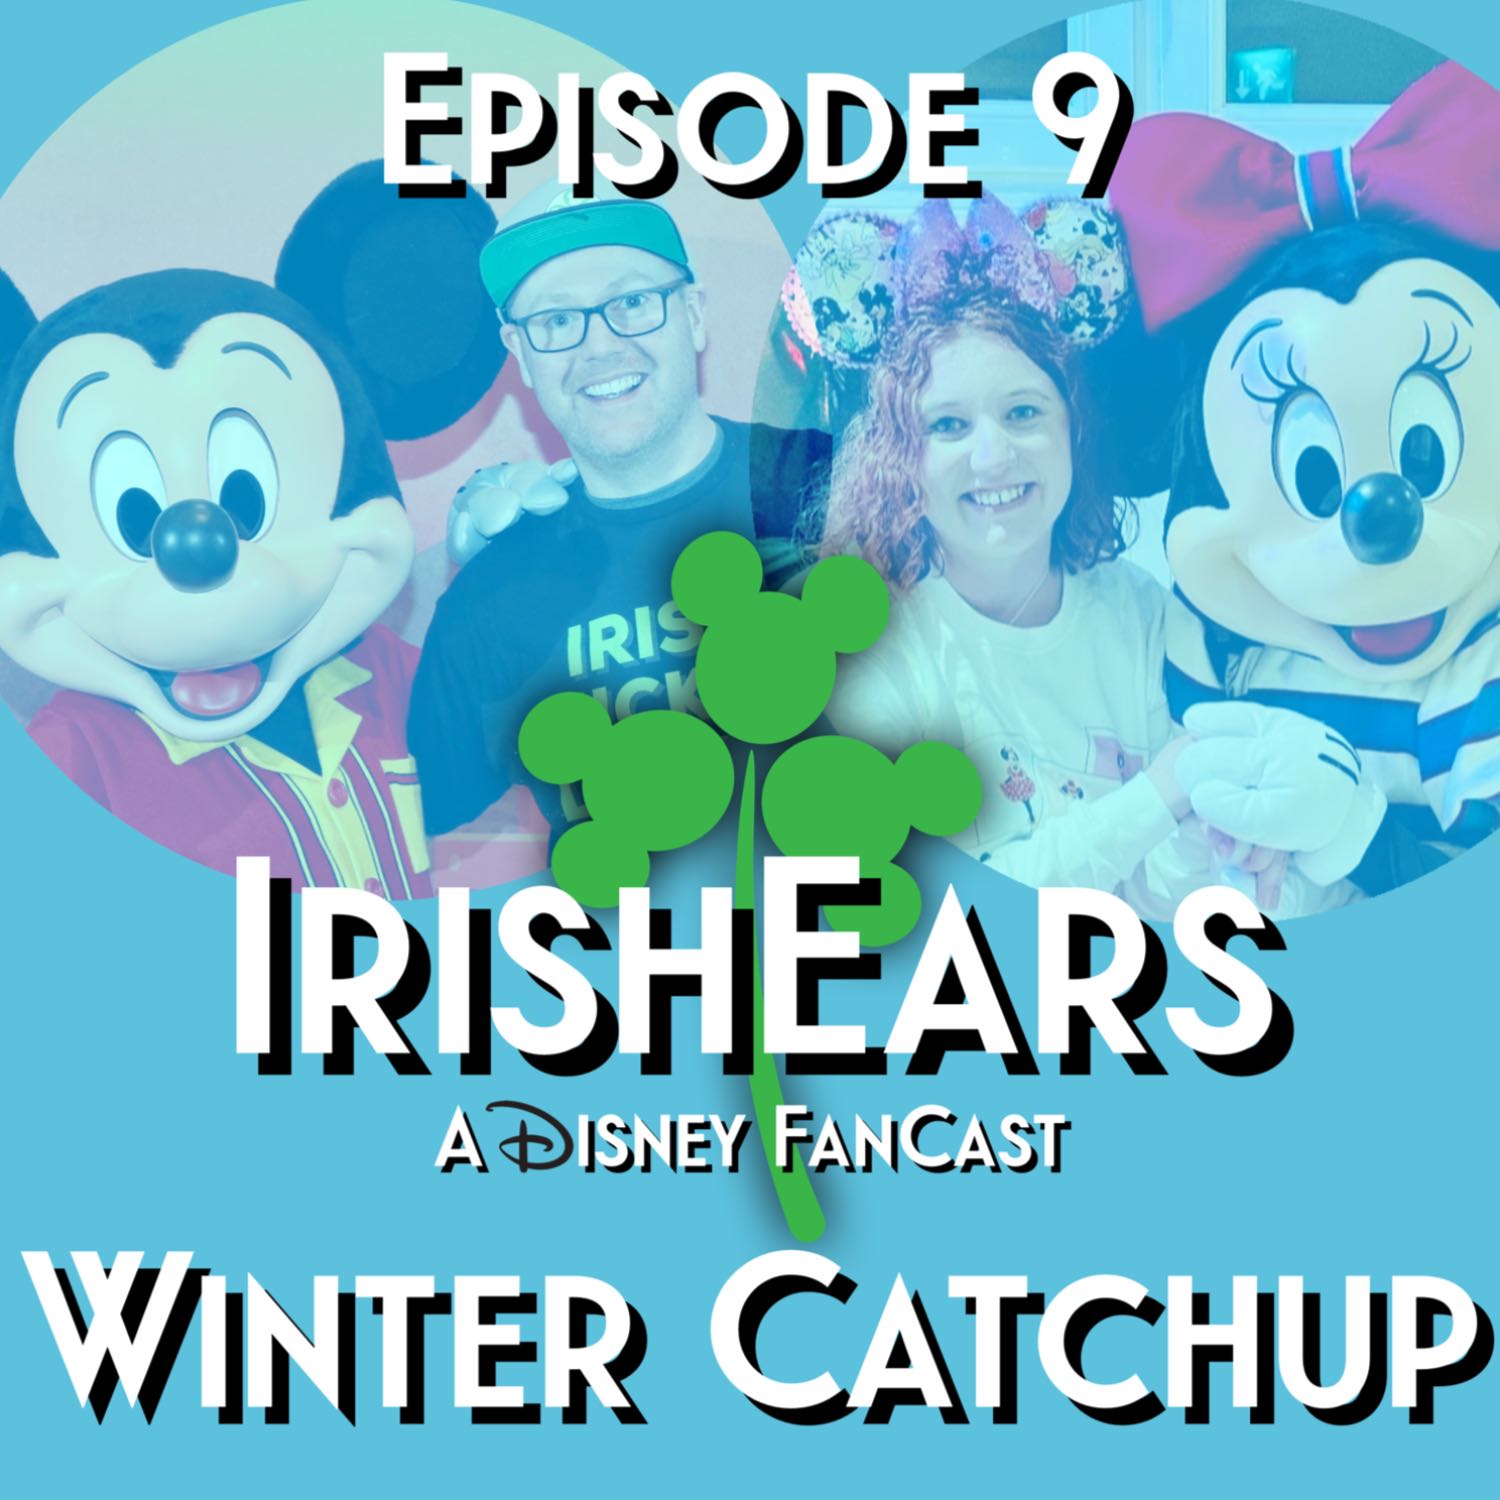 Episode 9: Winter Catchup